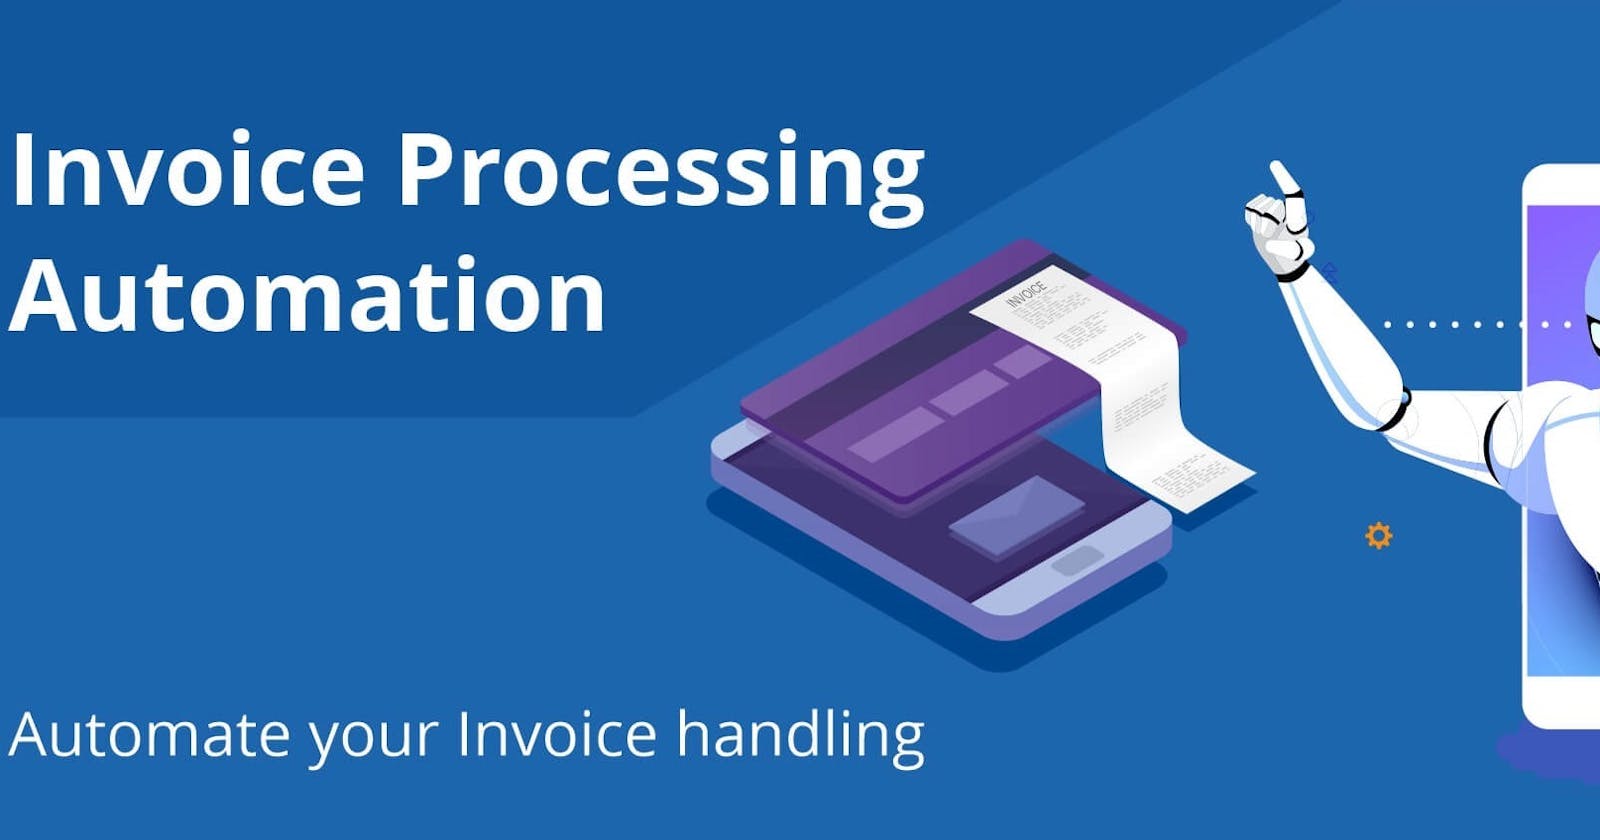 Invoice Processing Using Automation Anywhere